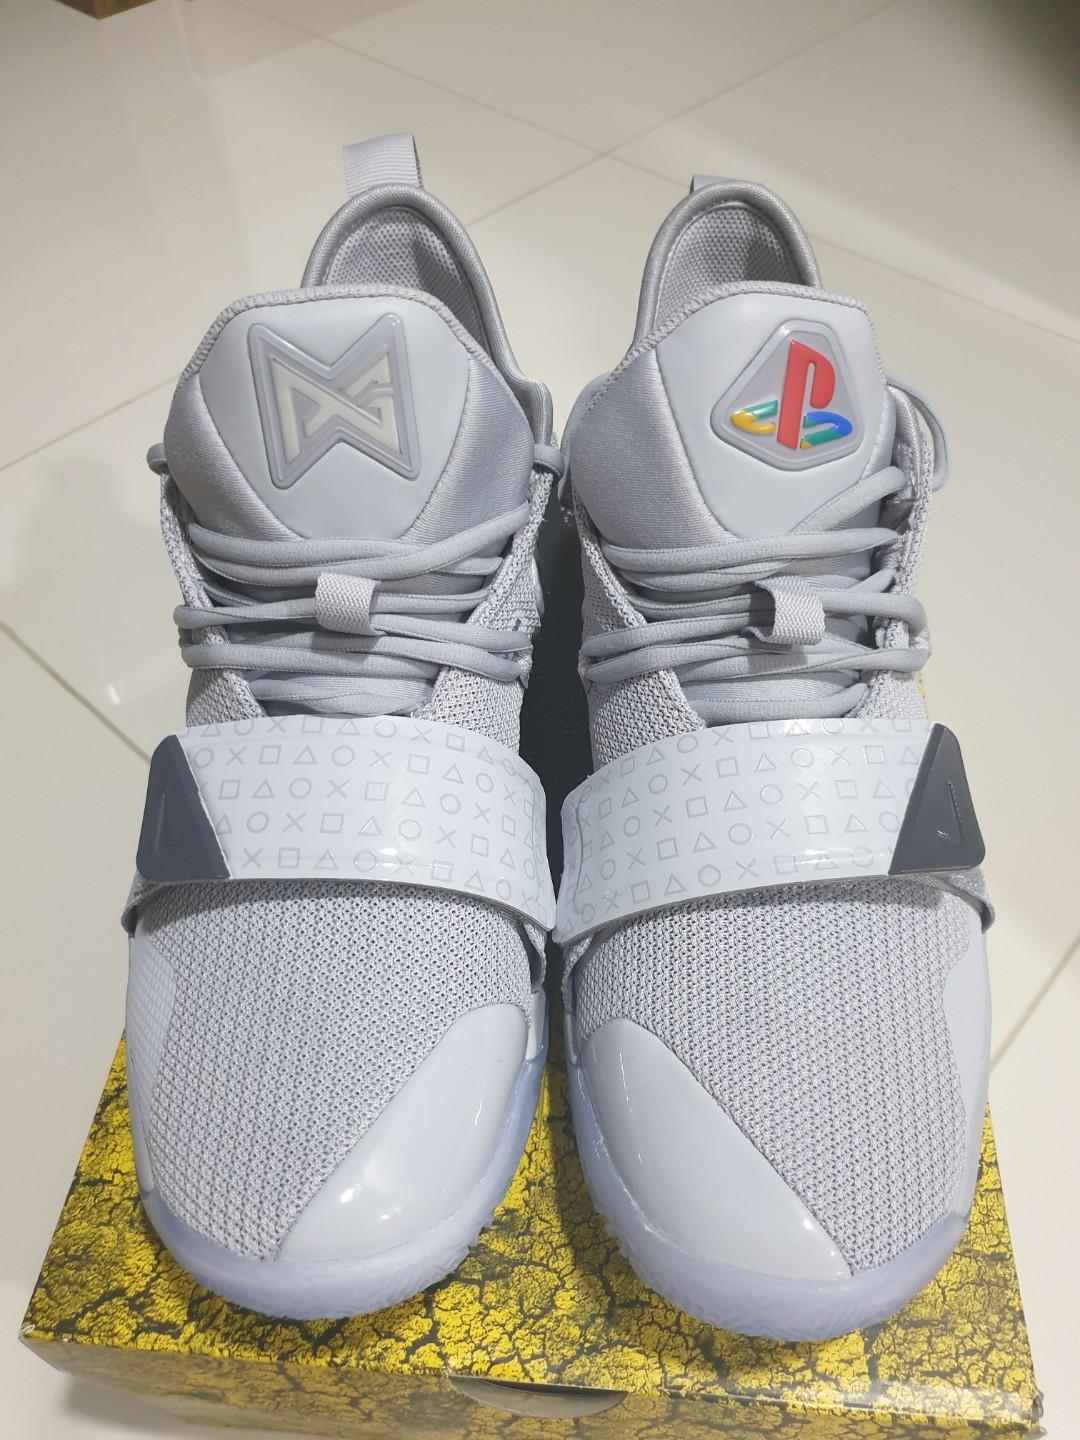 pg2 5 playstation for sale